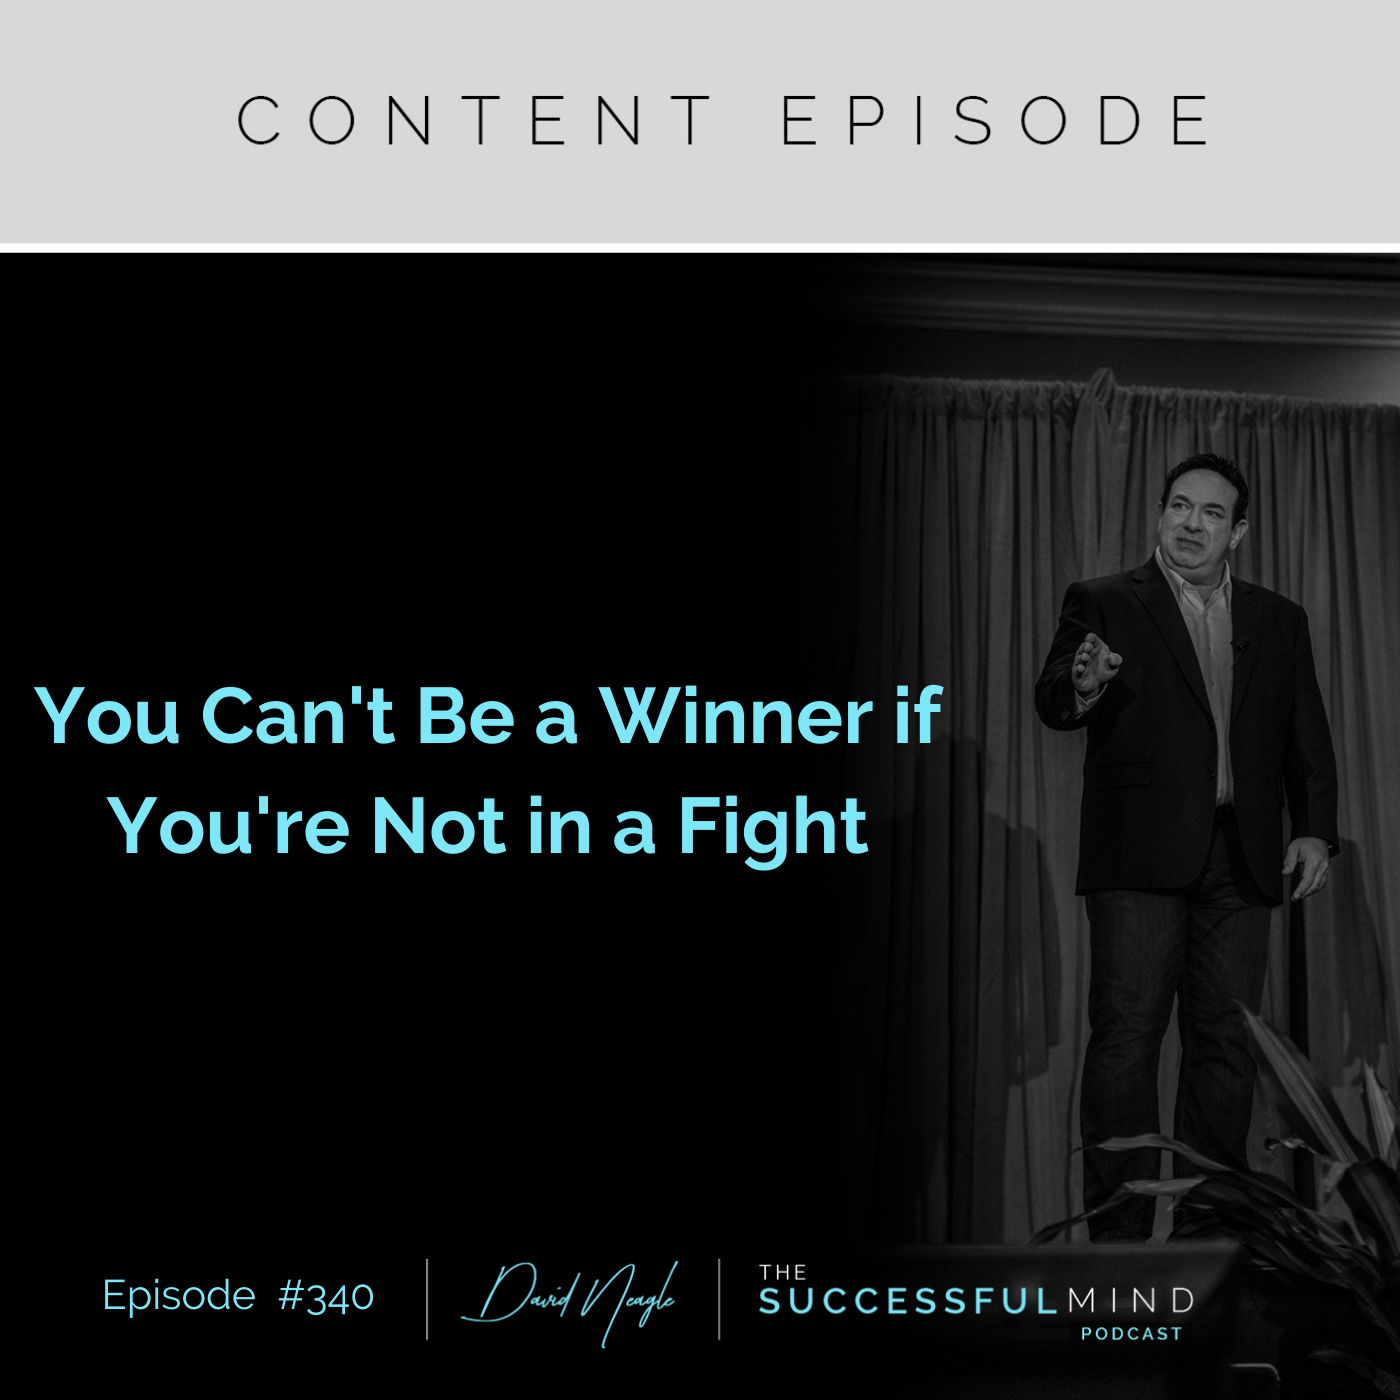 The Successful Mind Podcast - Episode 340 - You Can’t Be a Winner if You’re Not in a Fight